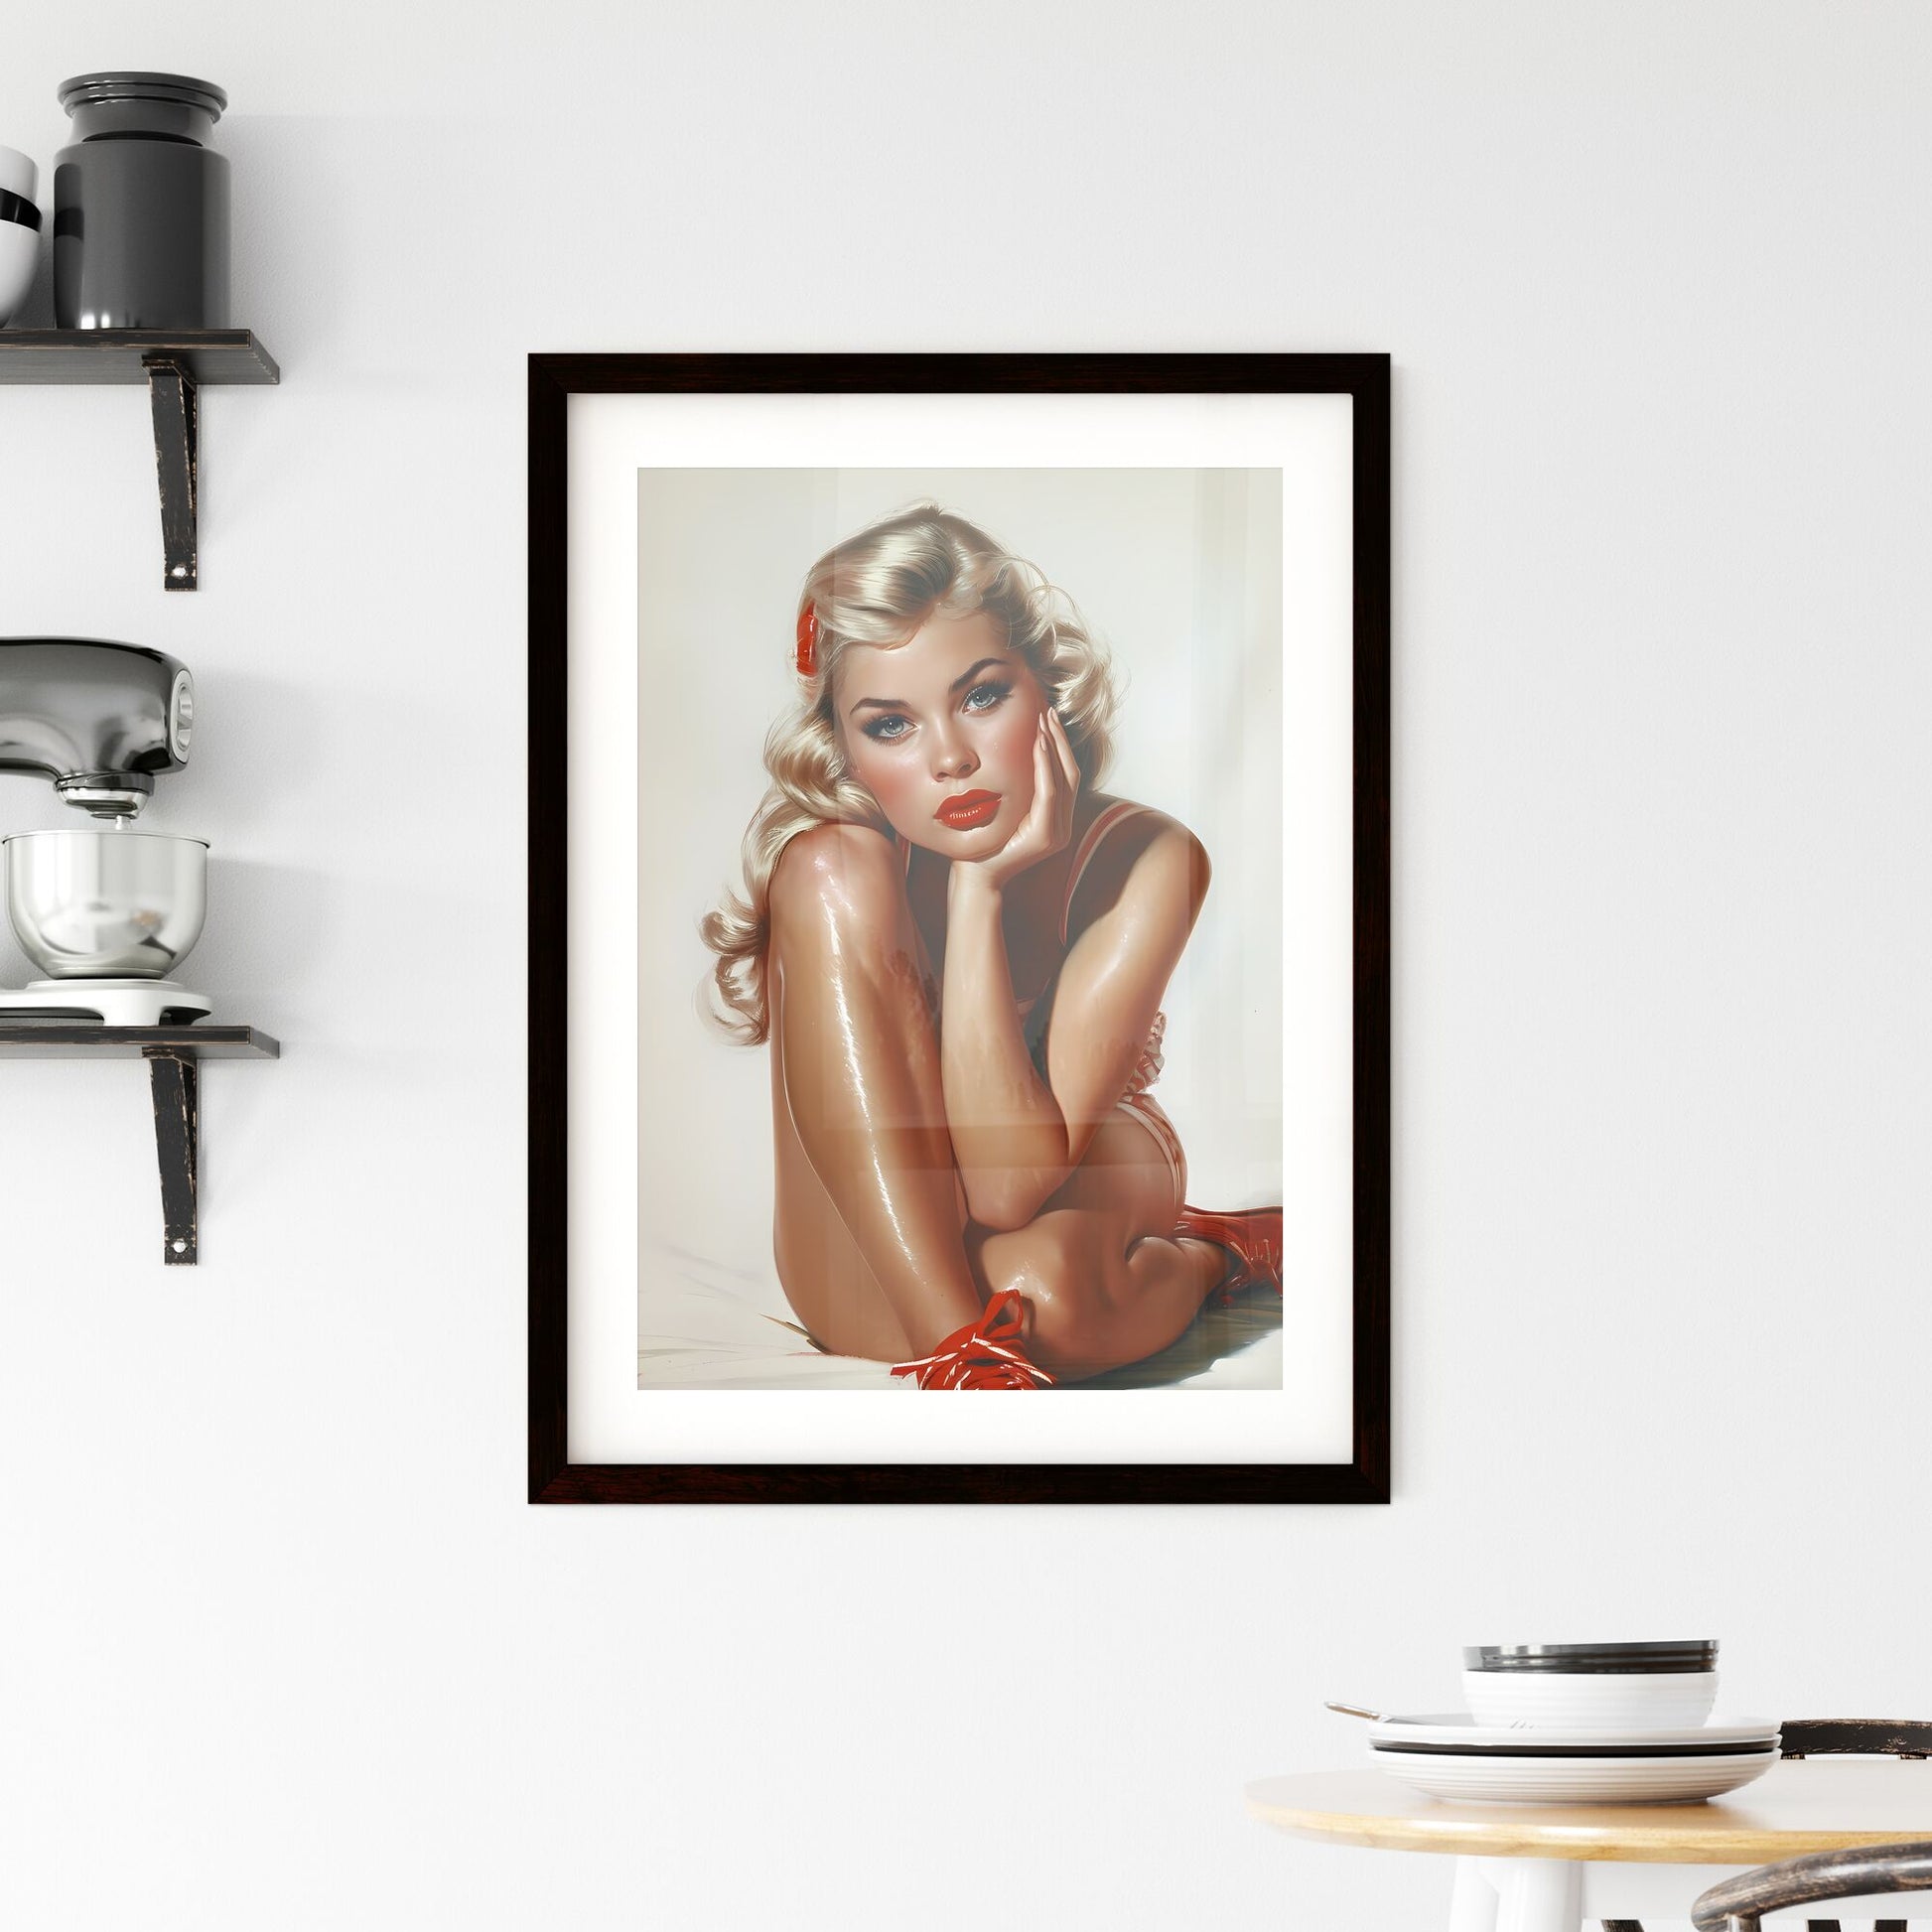 Sitting pin up factory worker girl - Art print of a woman sitting on the floor Default Title